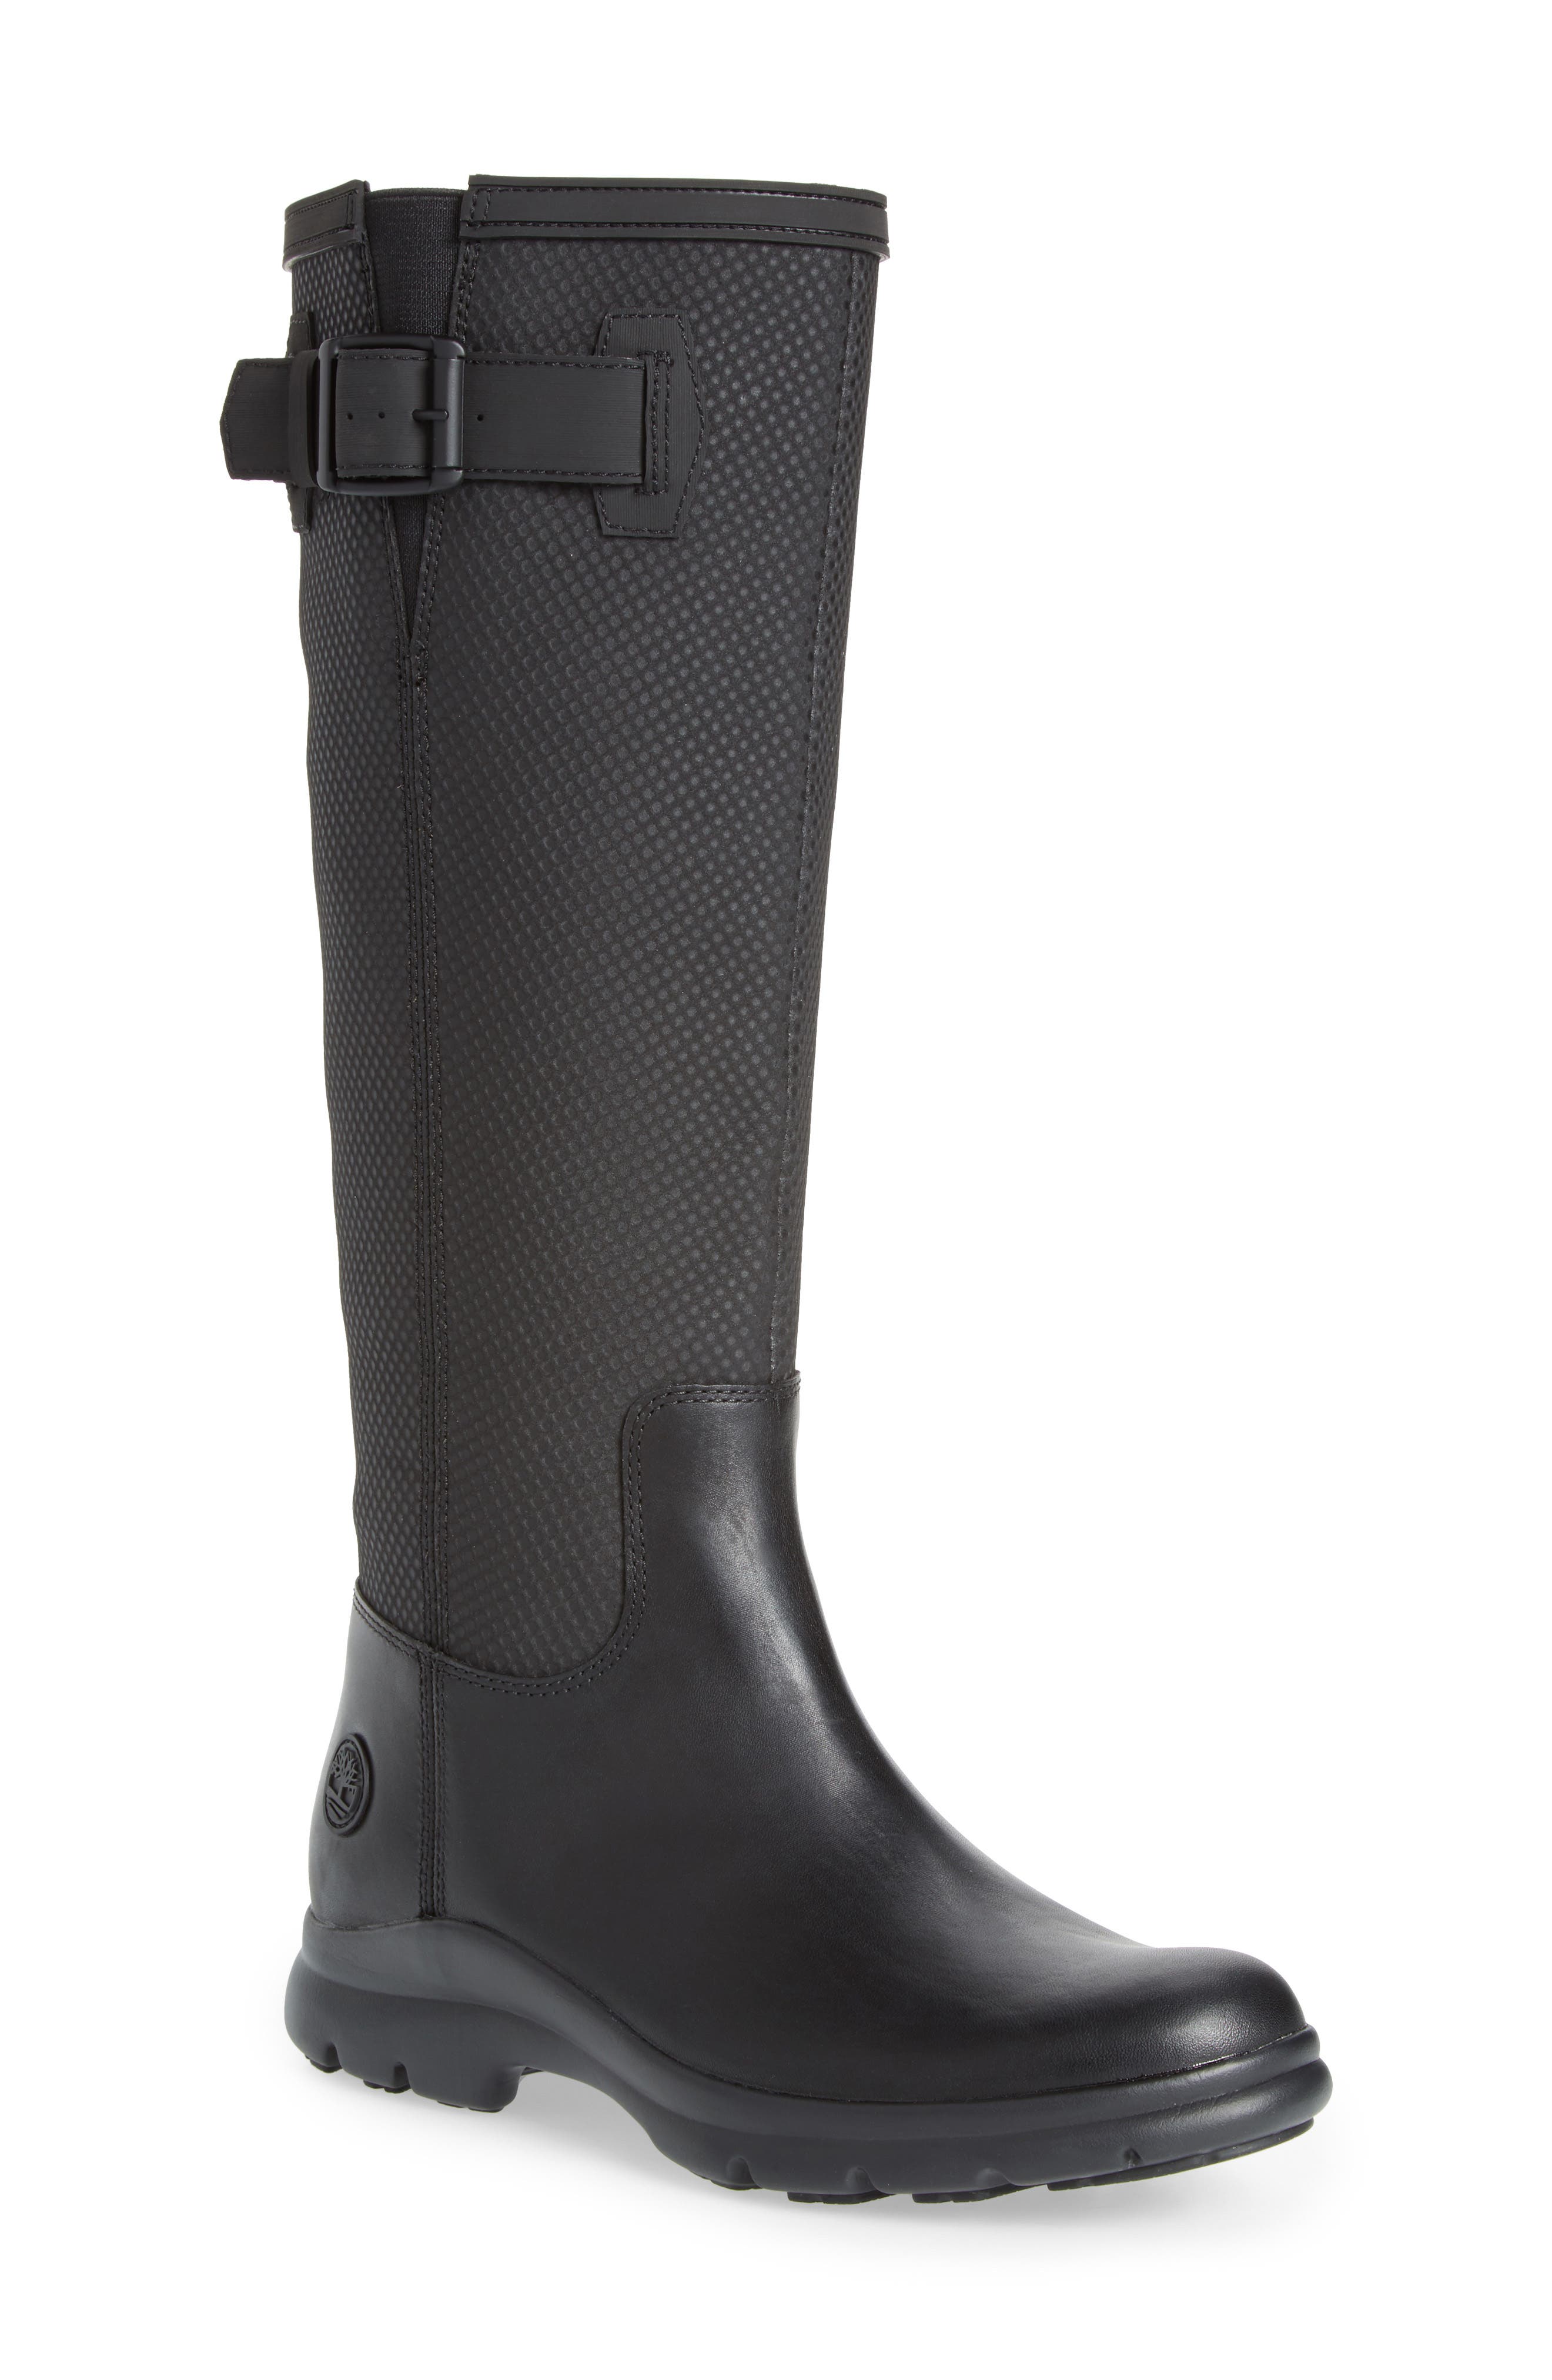 Turain Tall Waterproof Leather Boot 